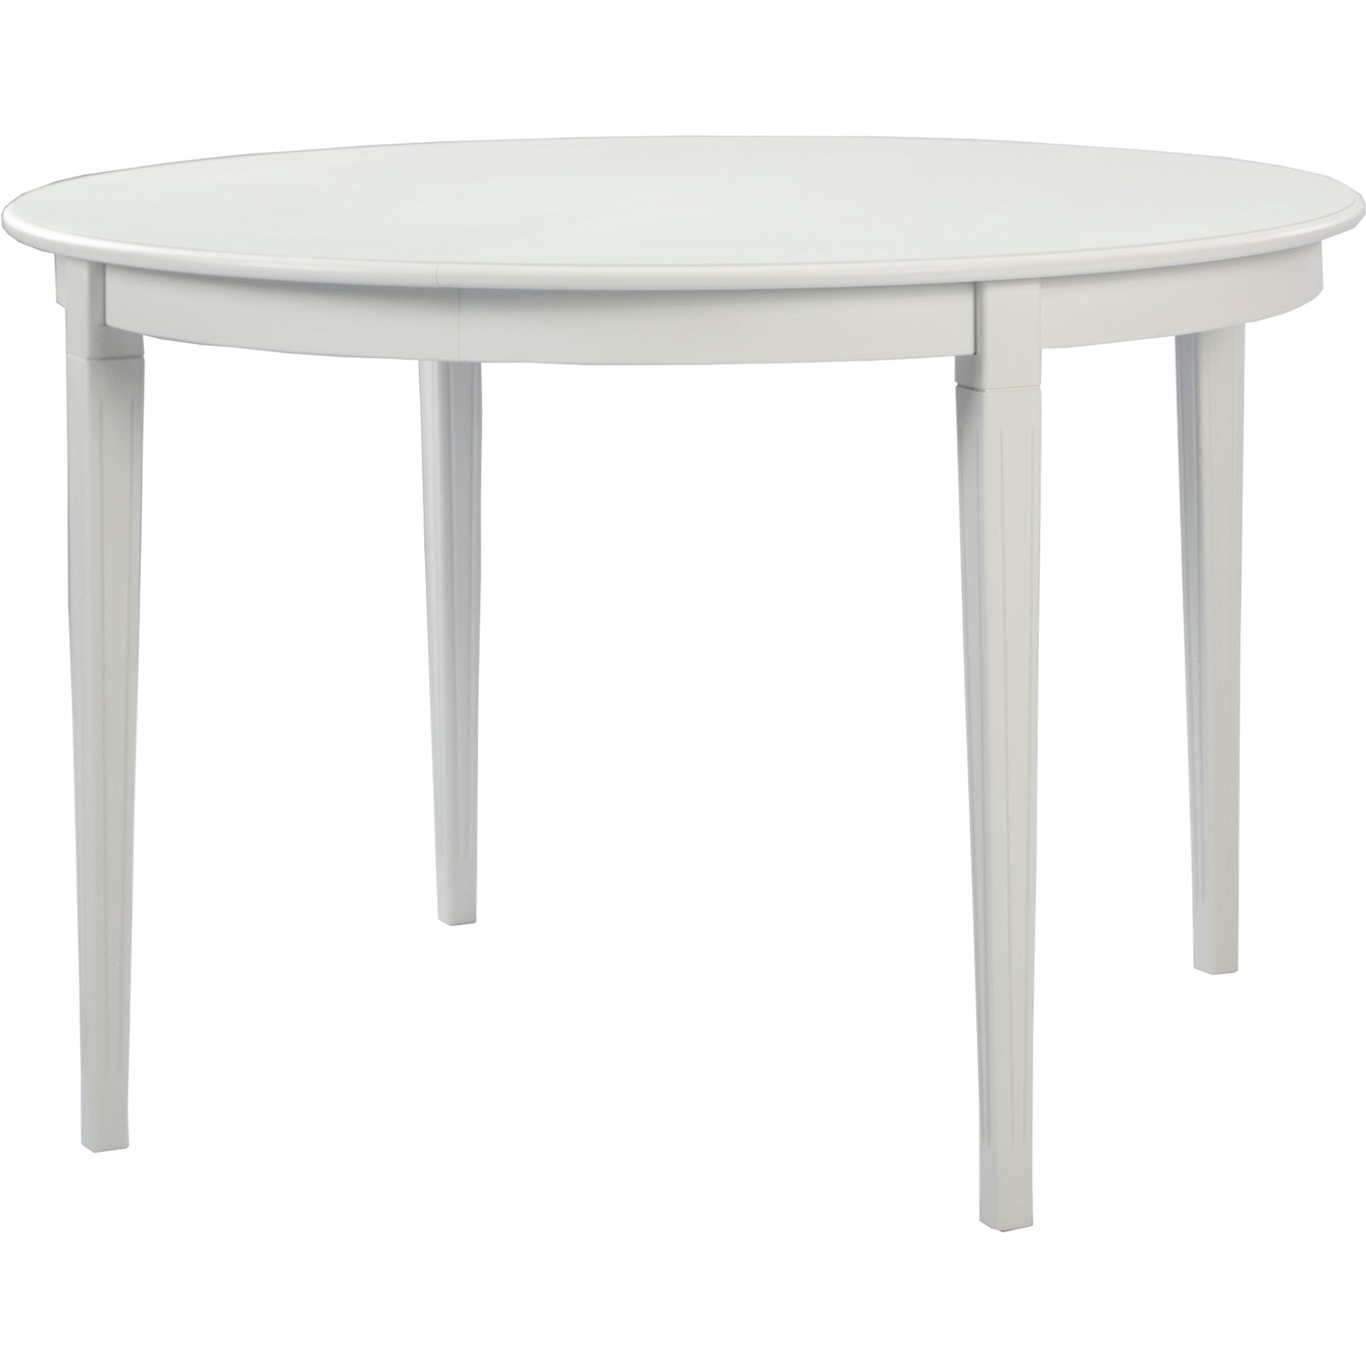 Stockholm 2.0 Dining table Ø114 Incl. 3 Inlays, Whitewash